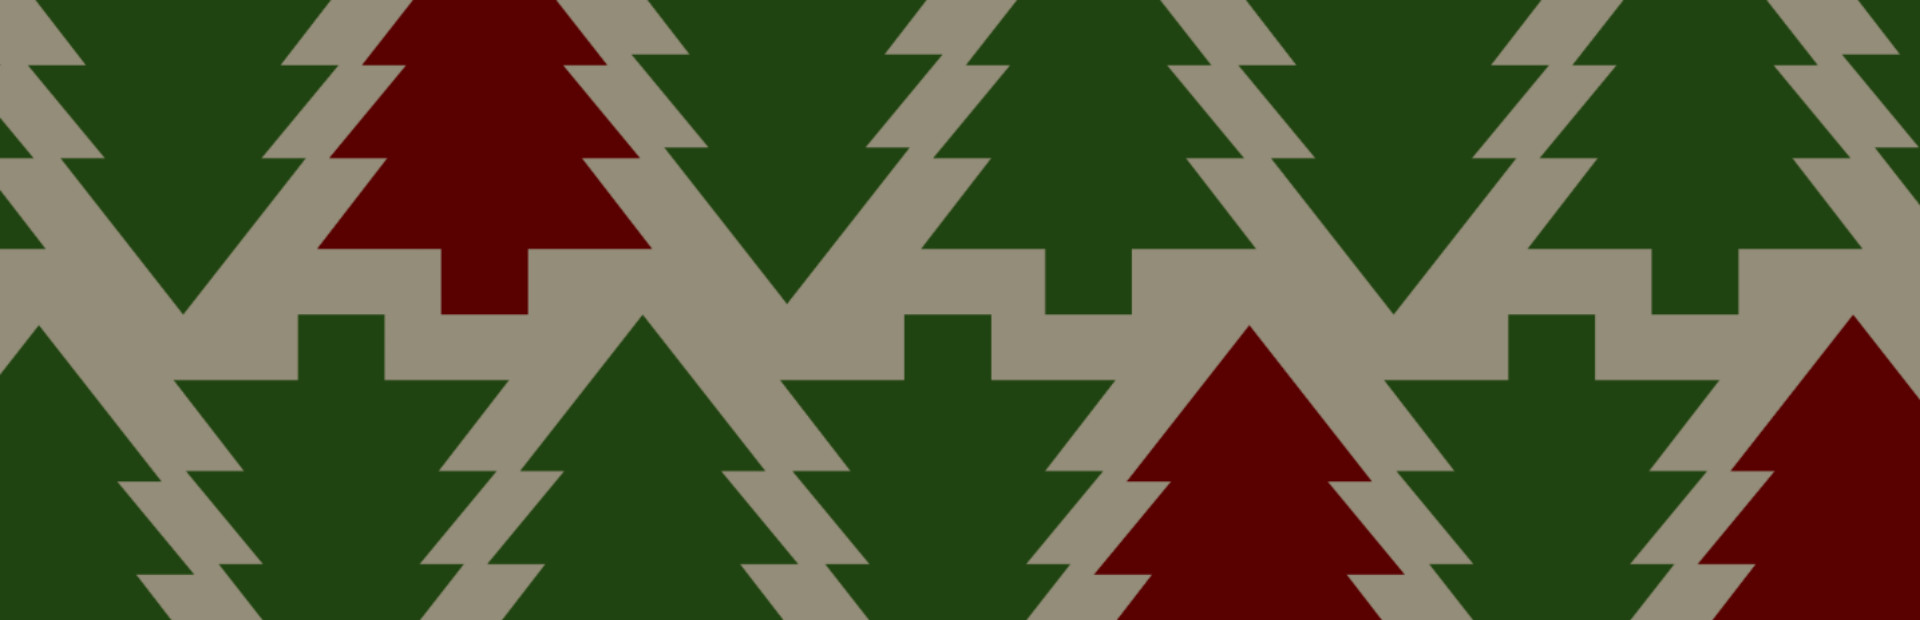 Pixel Puzzles 2: Christmas cover image